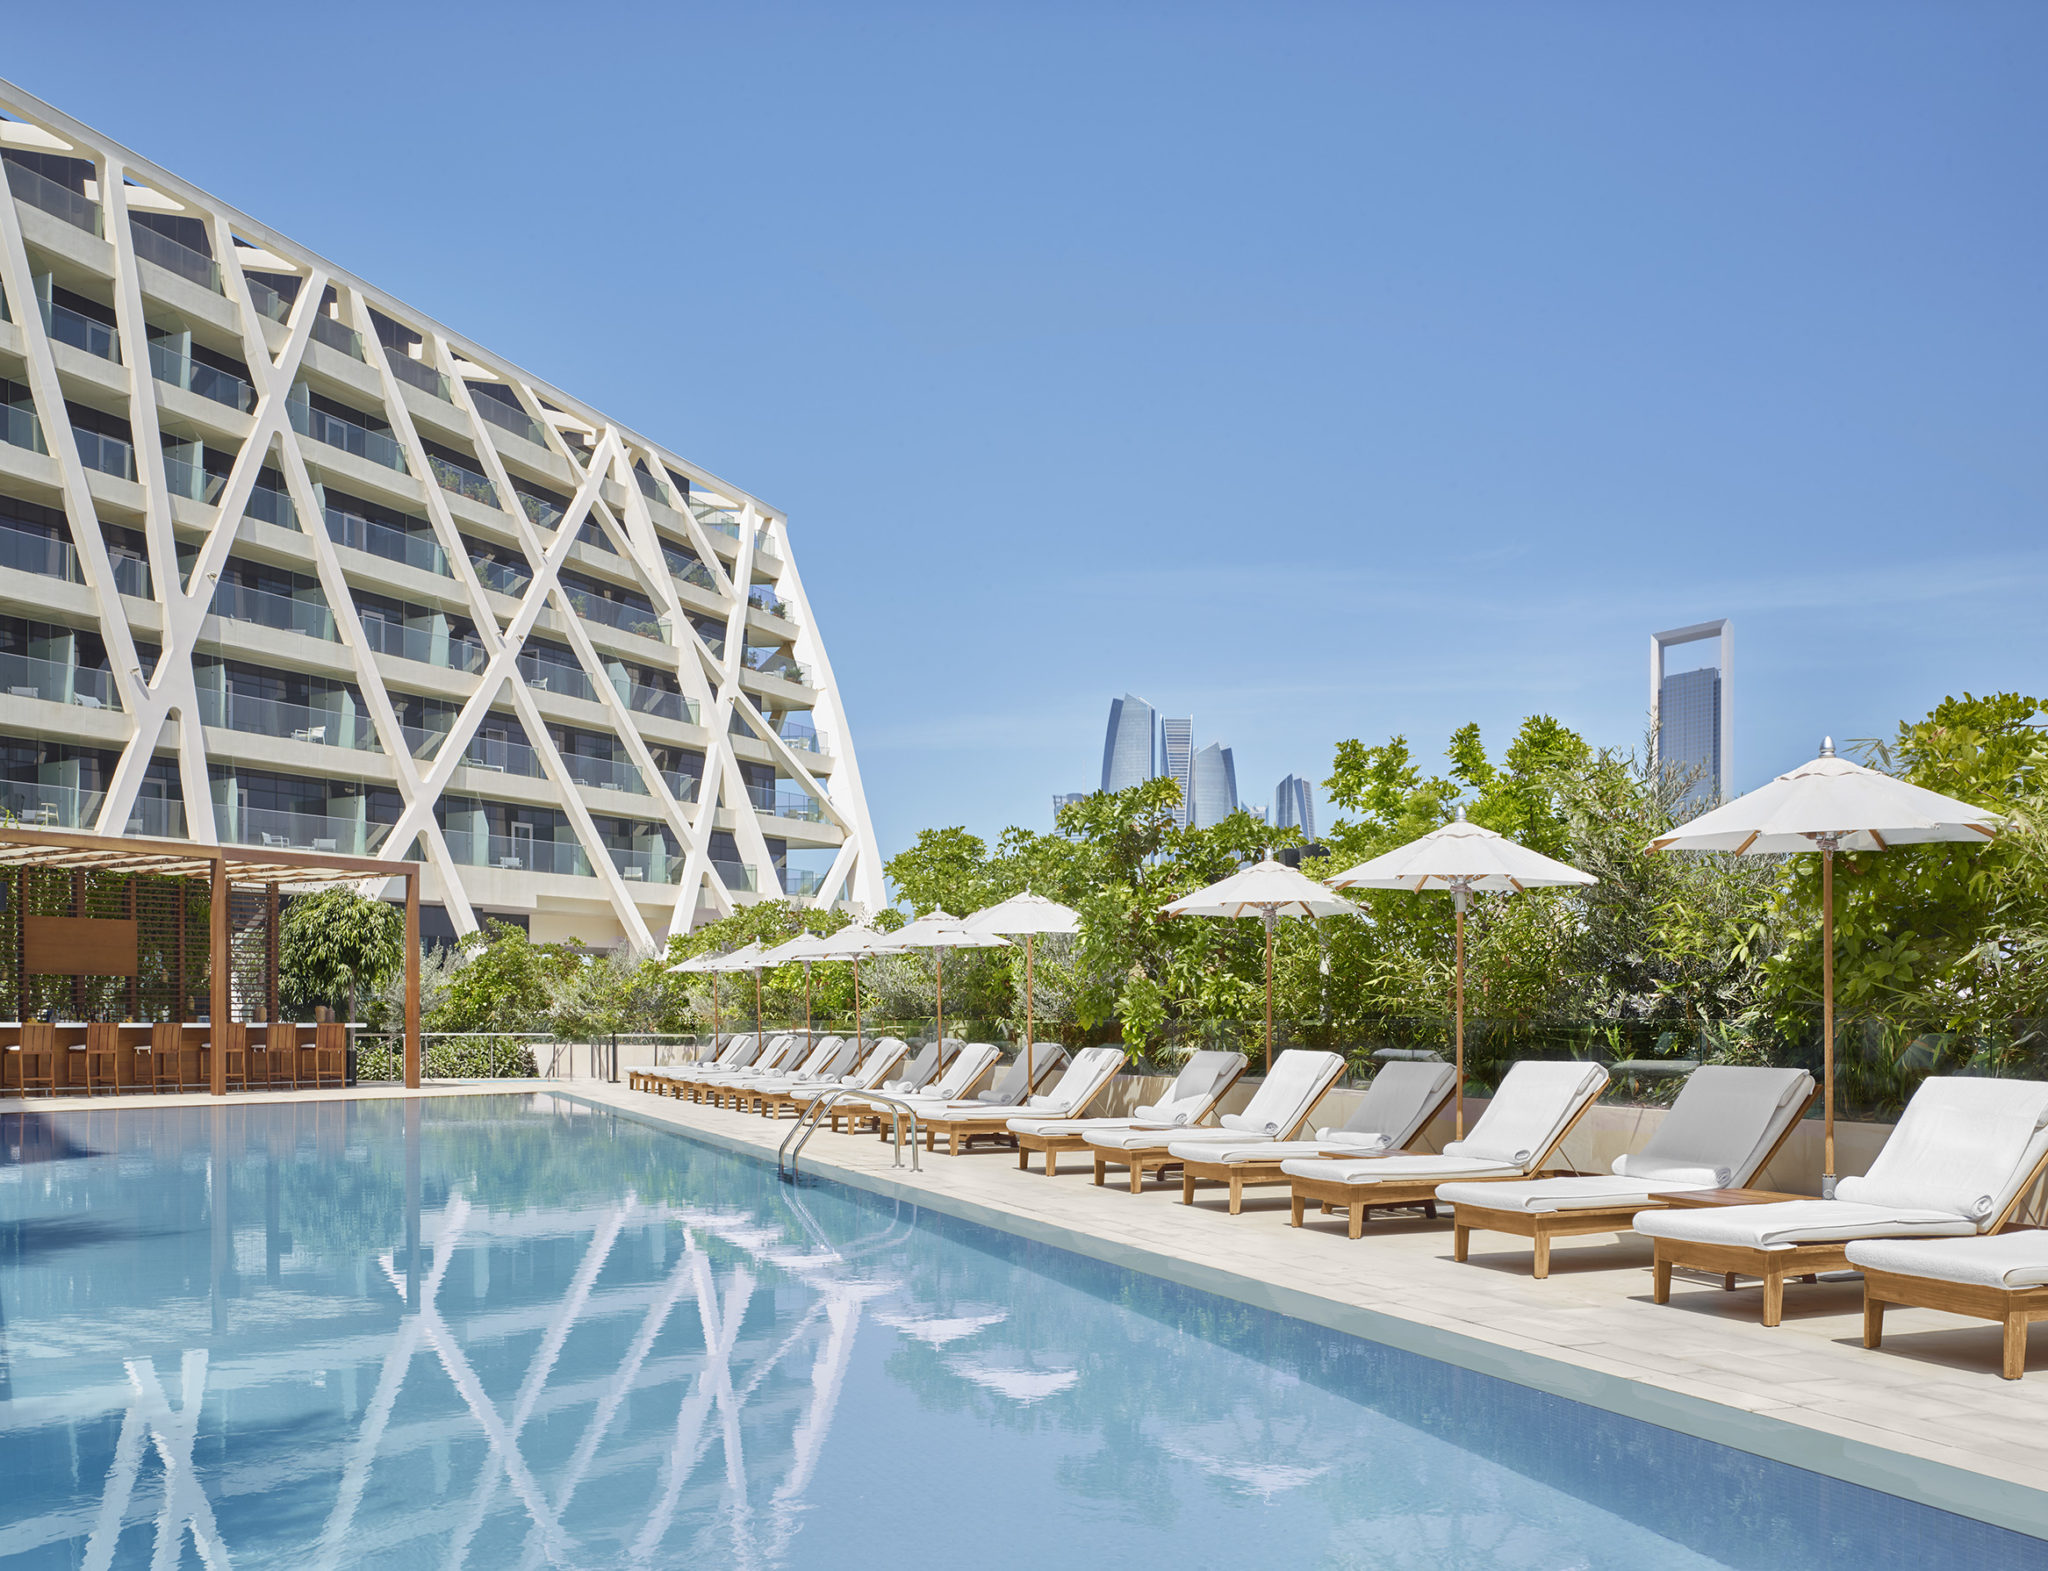 Abu Dhabi's best pool day pass offers